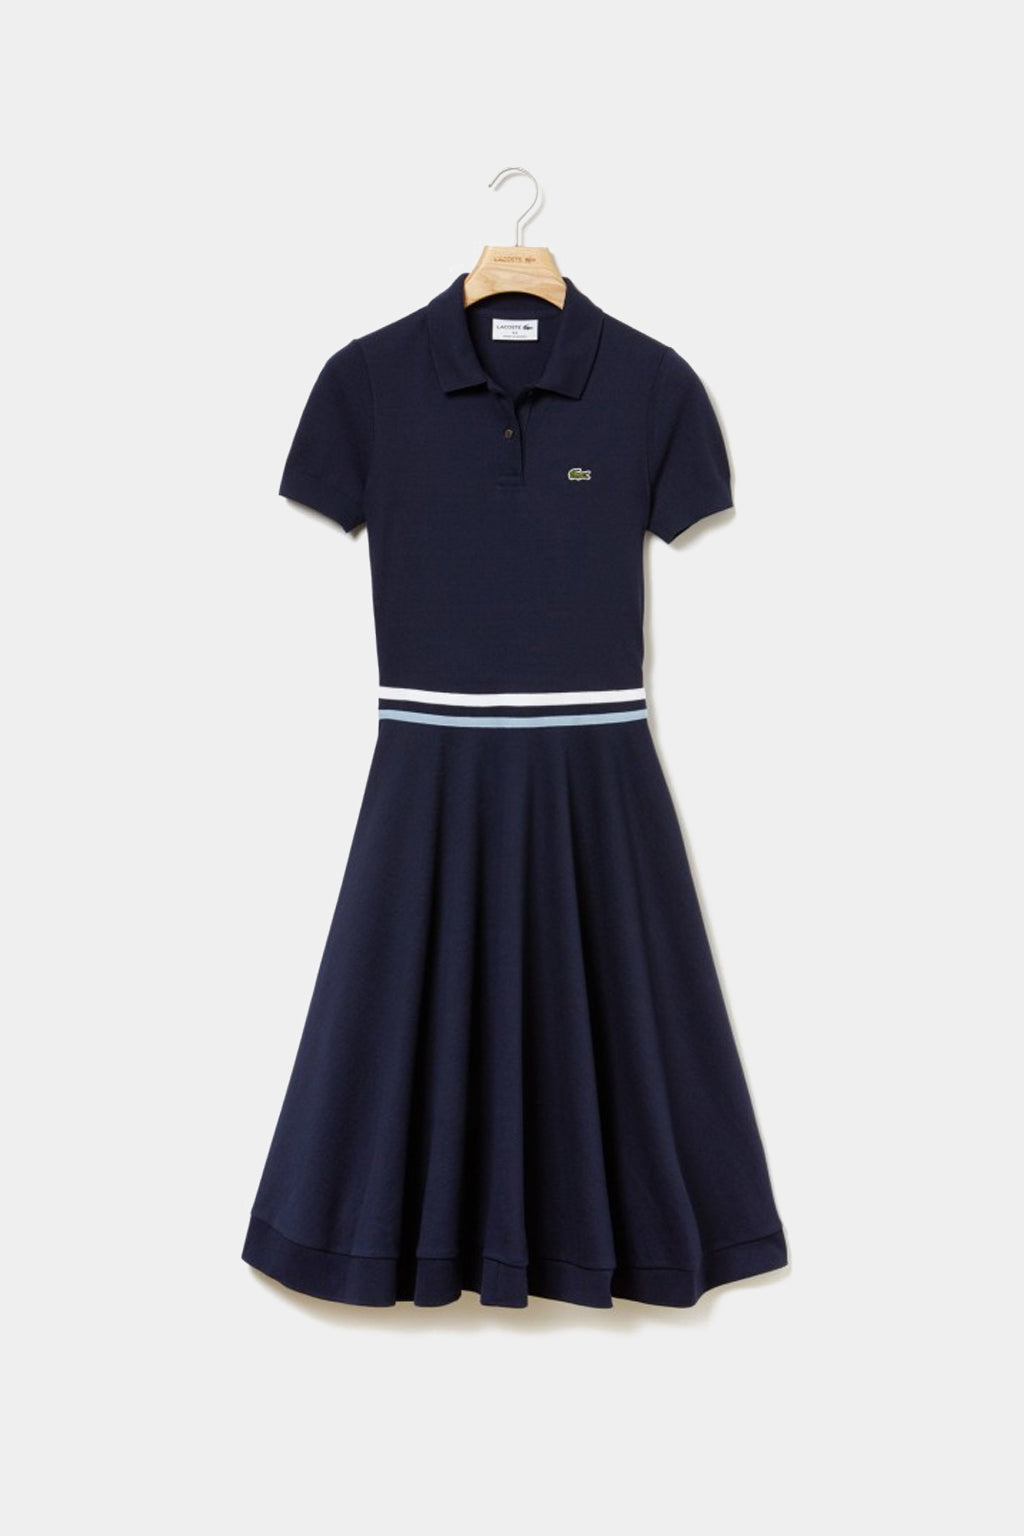 Lacoste - Women's Fitted Cotton Polo Dress